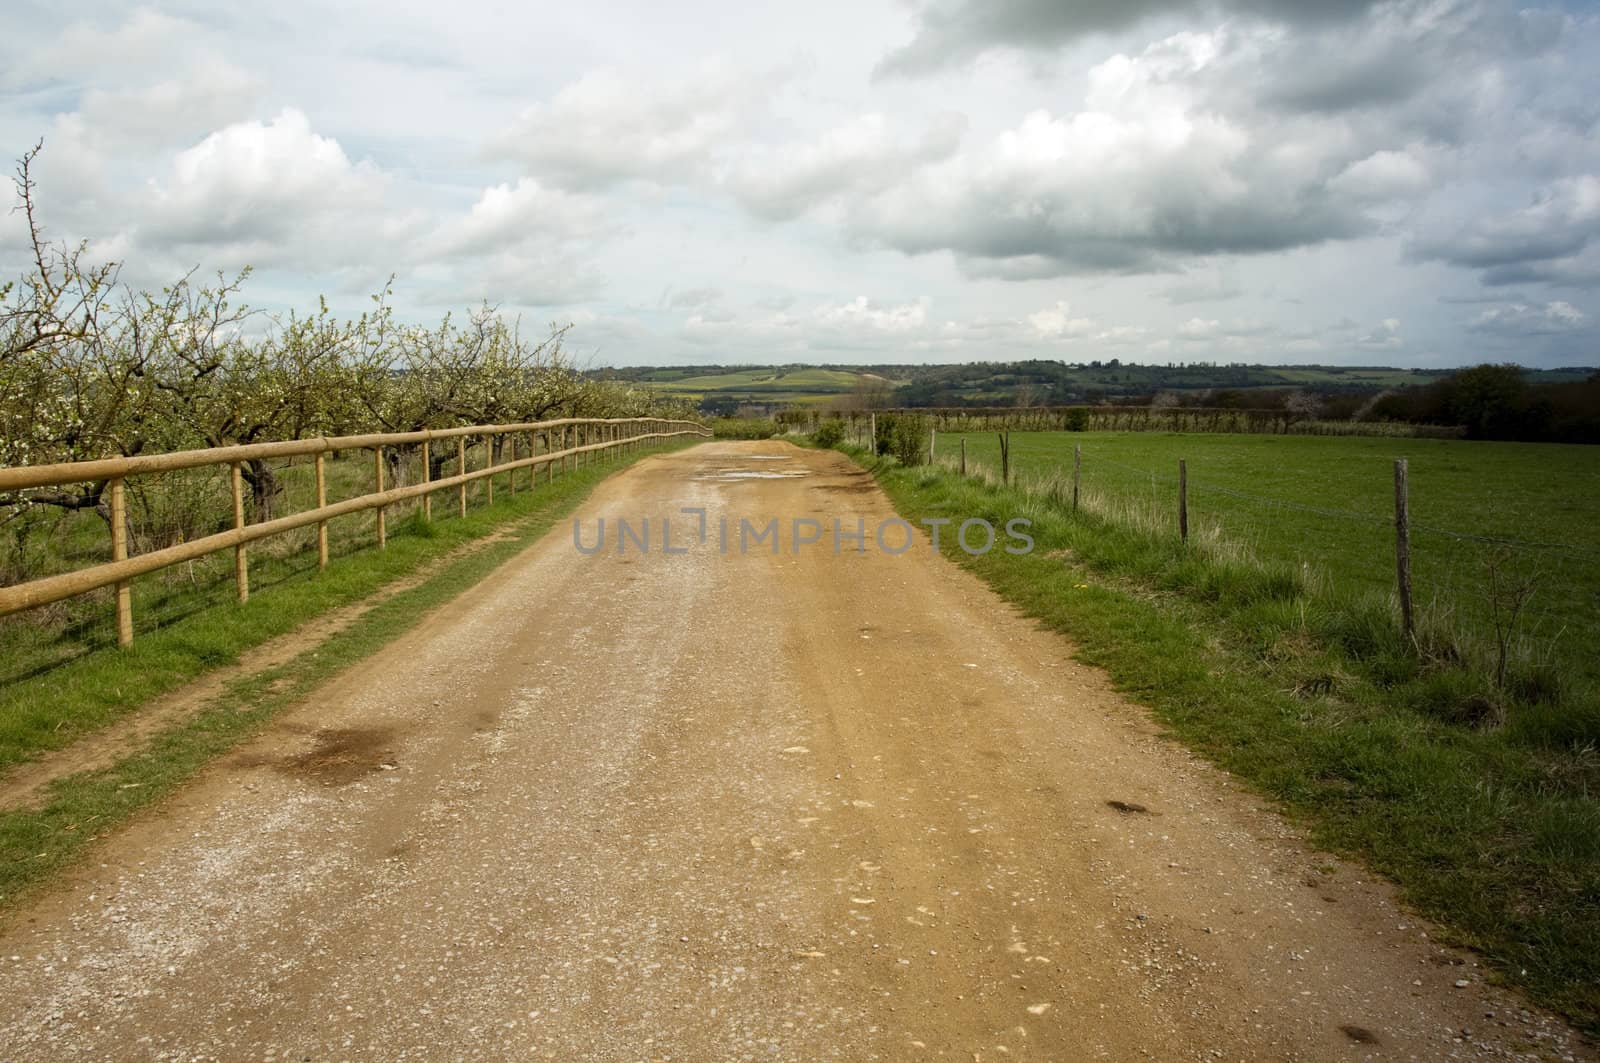 A road in the countryside with a wooden fence